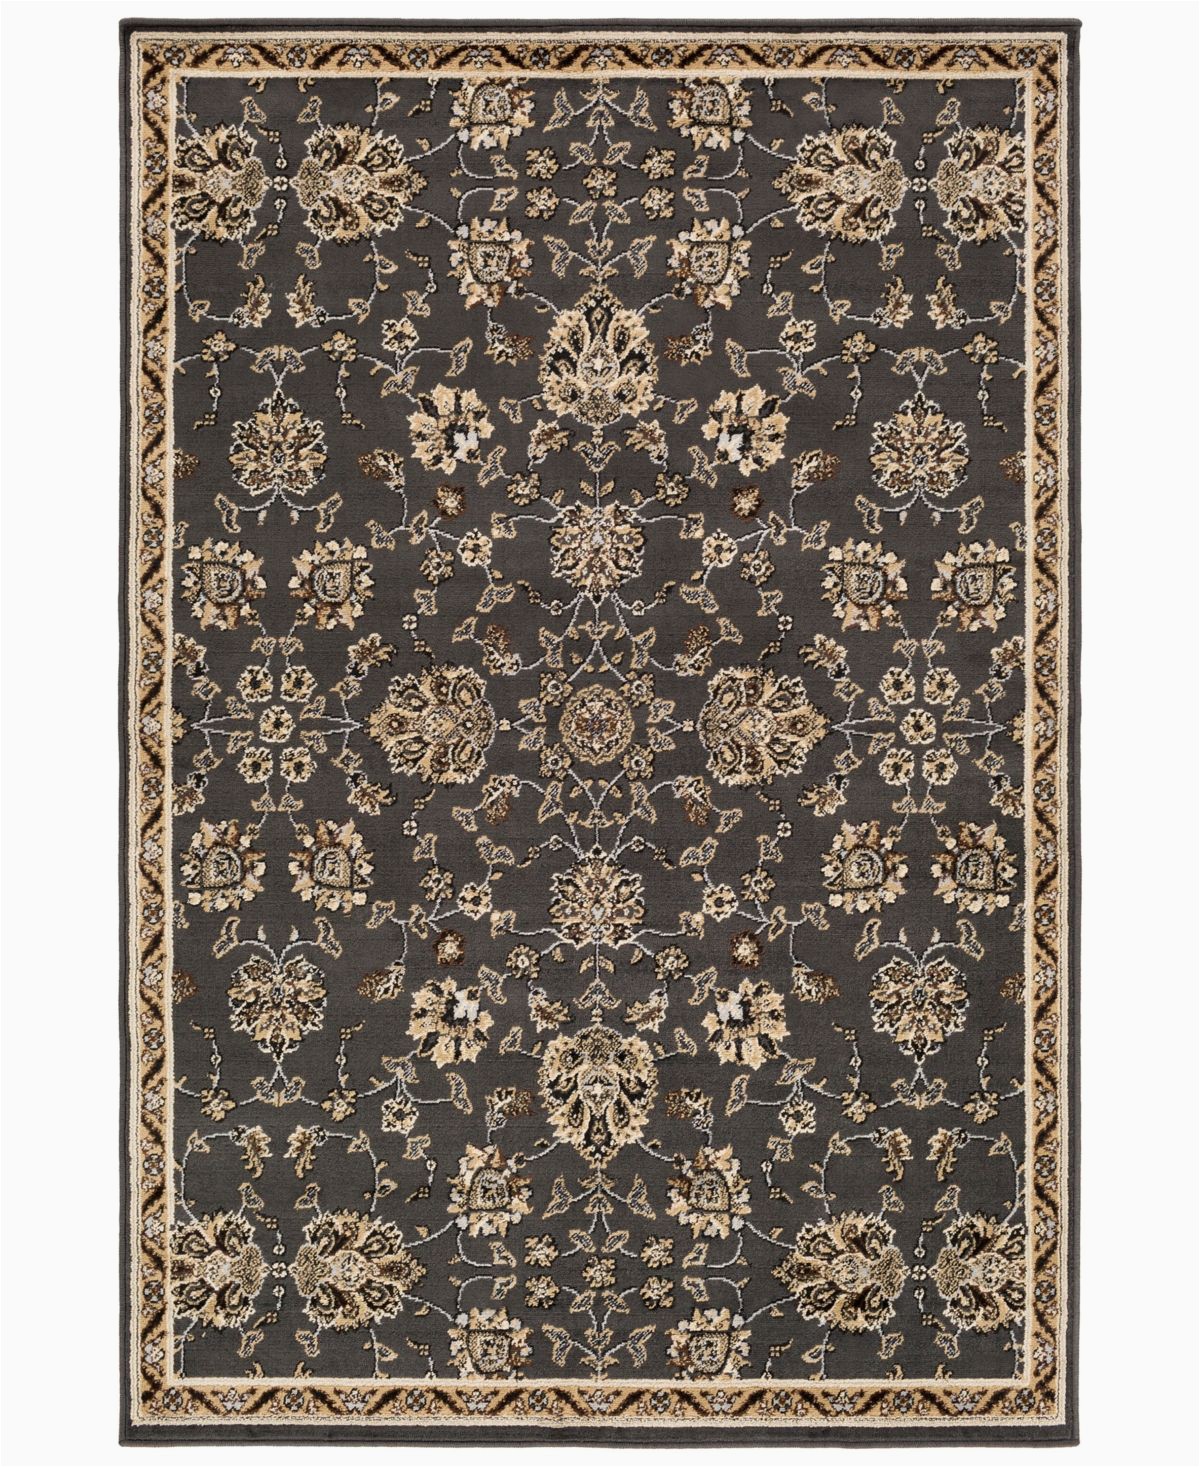 10 X 10 area Rugs at Lowes Surya Closeout Paramount Par 1077 Charcoal 8 10" X 12 9